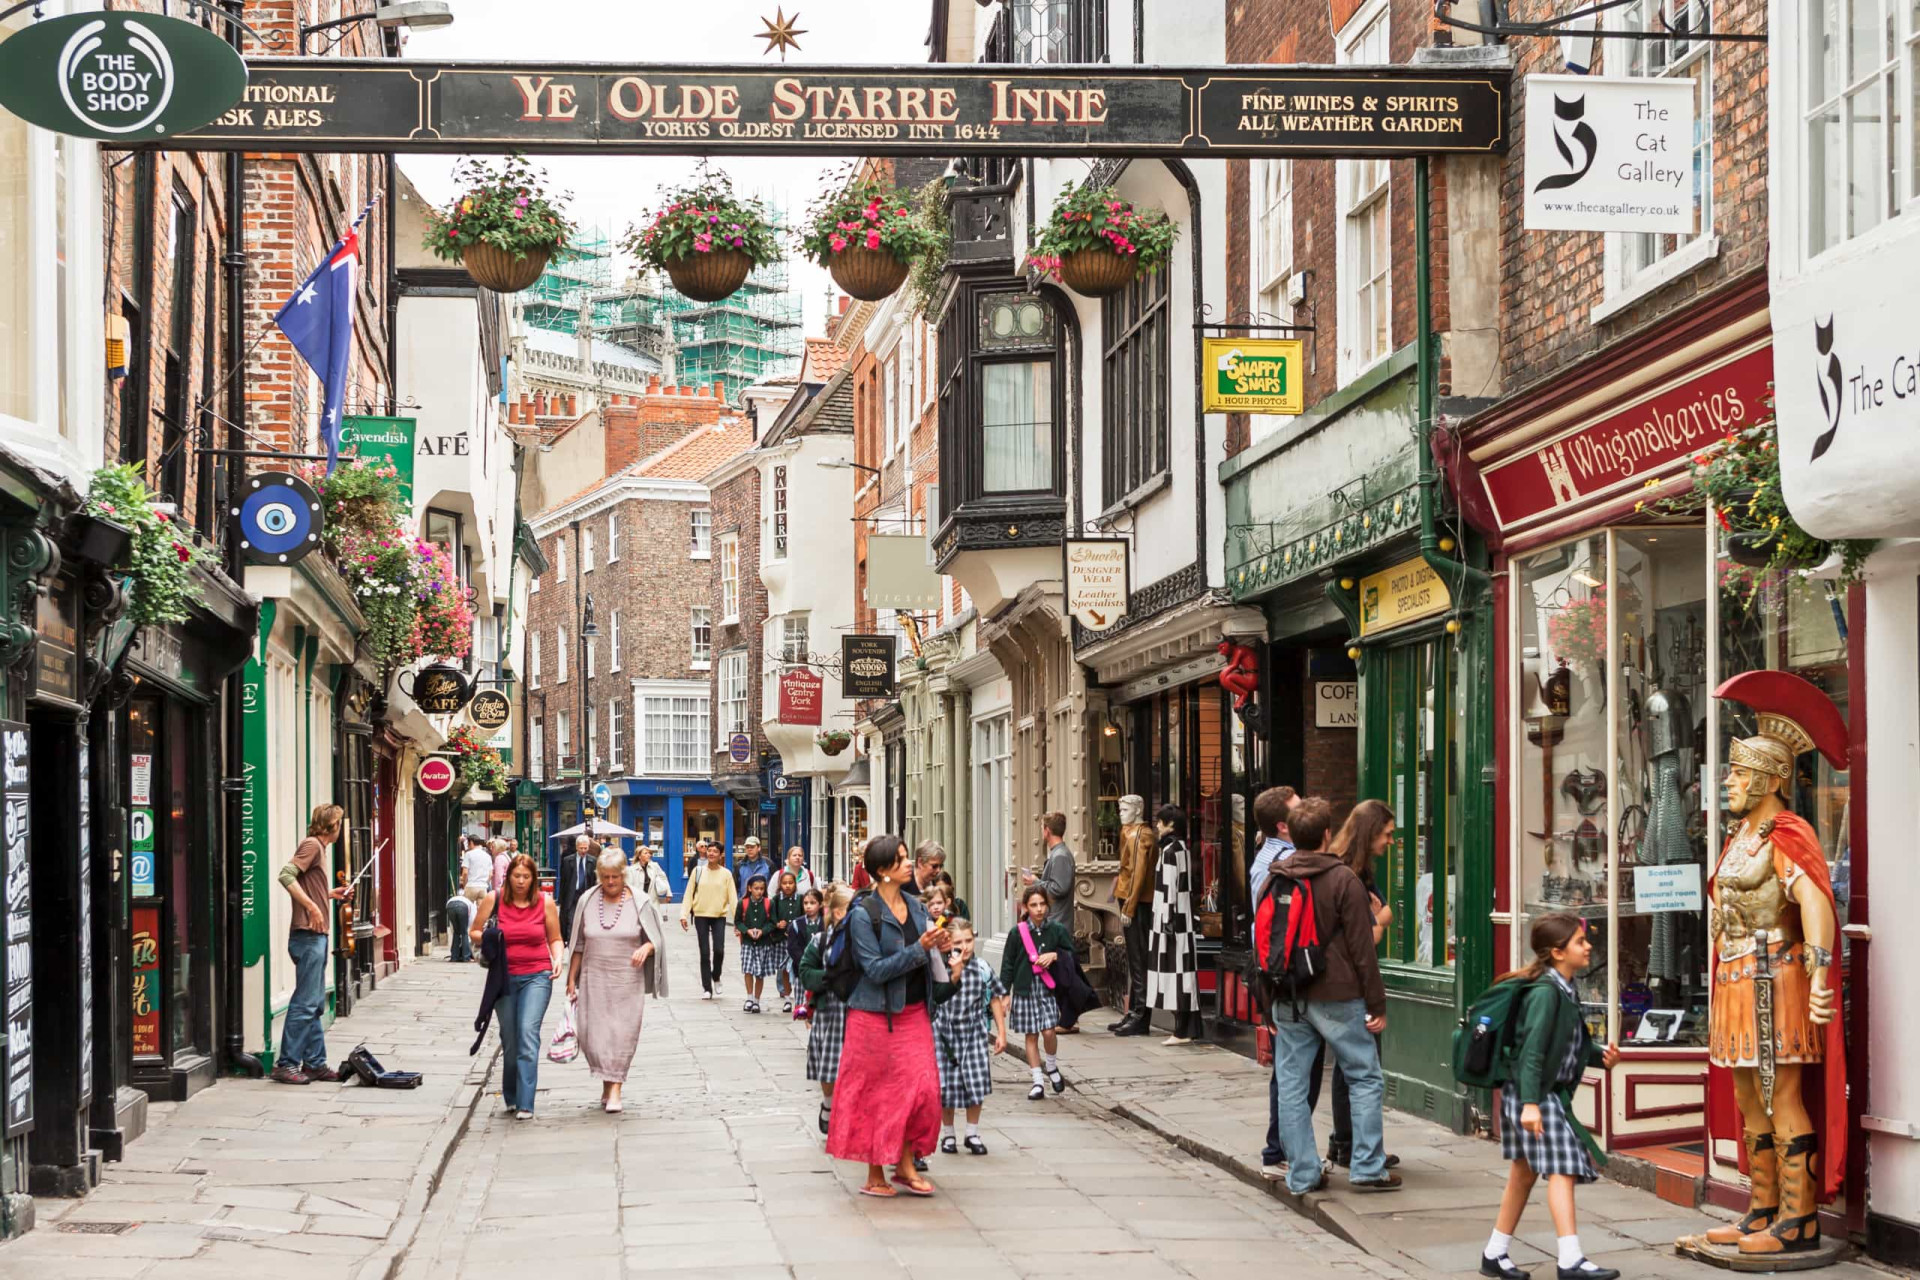 <p>The city of Vikings, York is great fun to visit with kids. The city's history comes to life at attractions such as the Jorvik Viking Center and the bloodthirsty York Dungeon, and there's a major rail museum where kids can admire centuries-old carriages used by royalty. </p><p>You may also like:<a href="https://www.starsinsider.com/n/318193?utm_source=msn.com&utm_medium=display&utm_campaign=referral_description&utm_content=481299v3en-en"> The coolest and craziest cable car rides in the world</a></p>